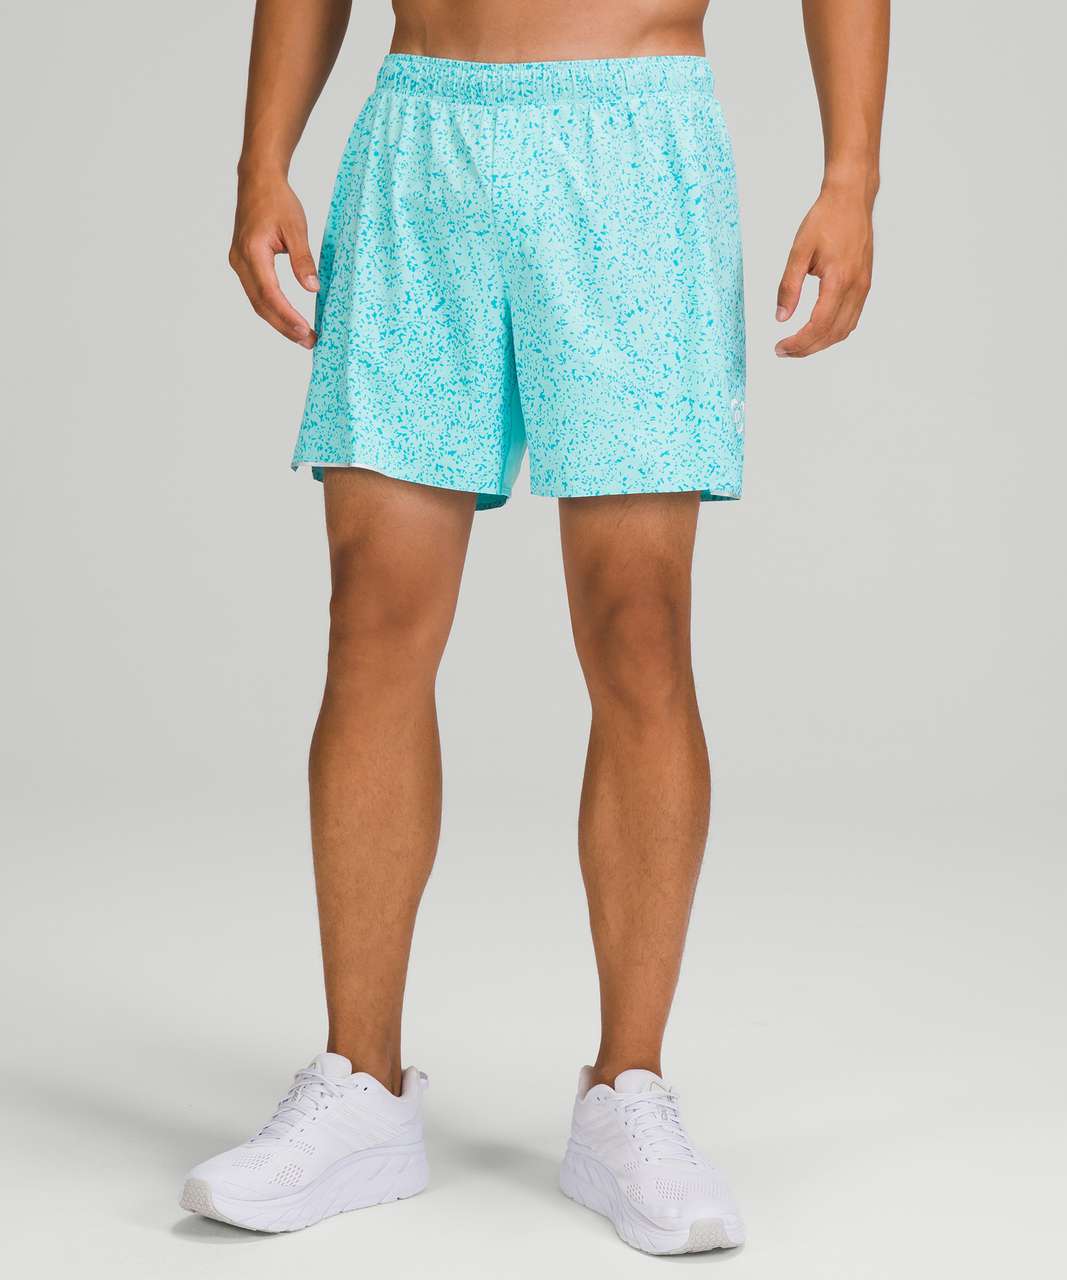 Find more Lululemon Seawheeze Shorts for sale at up to 90% off